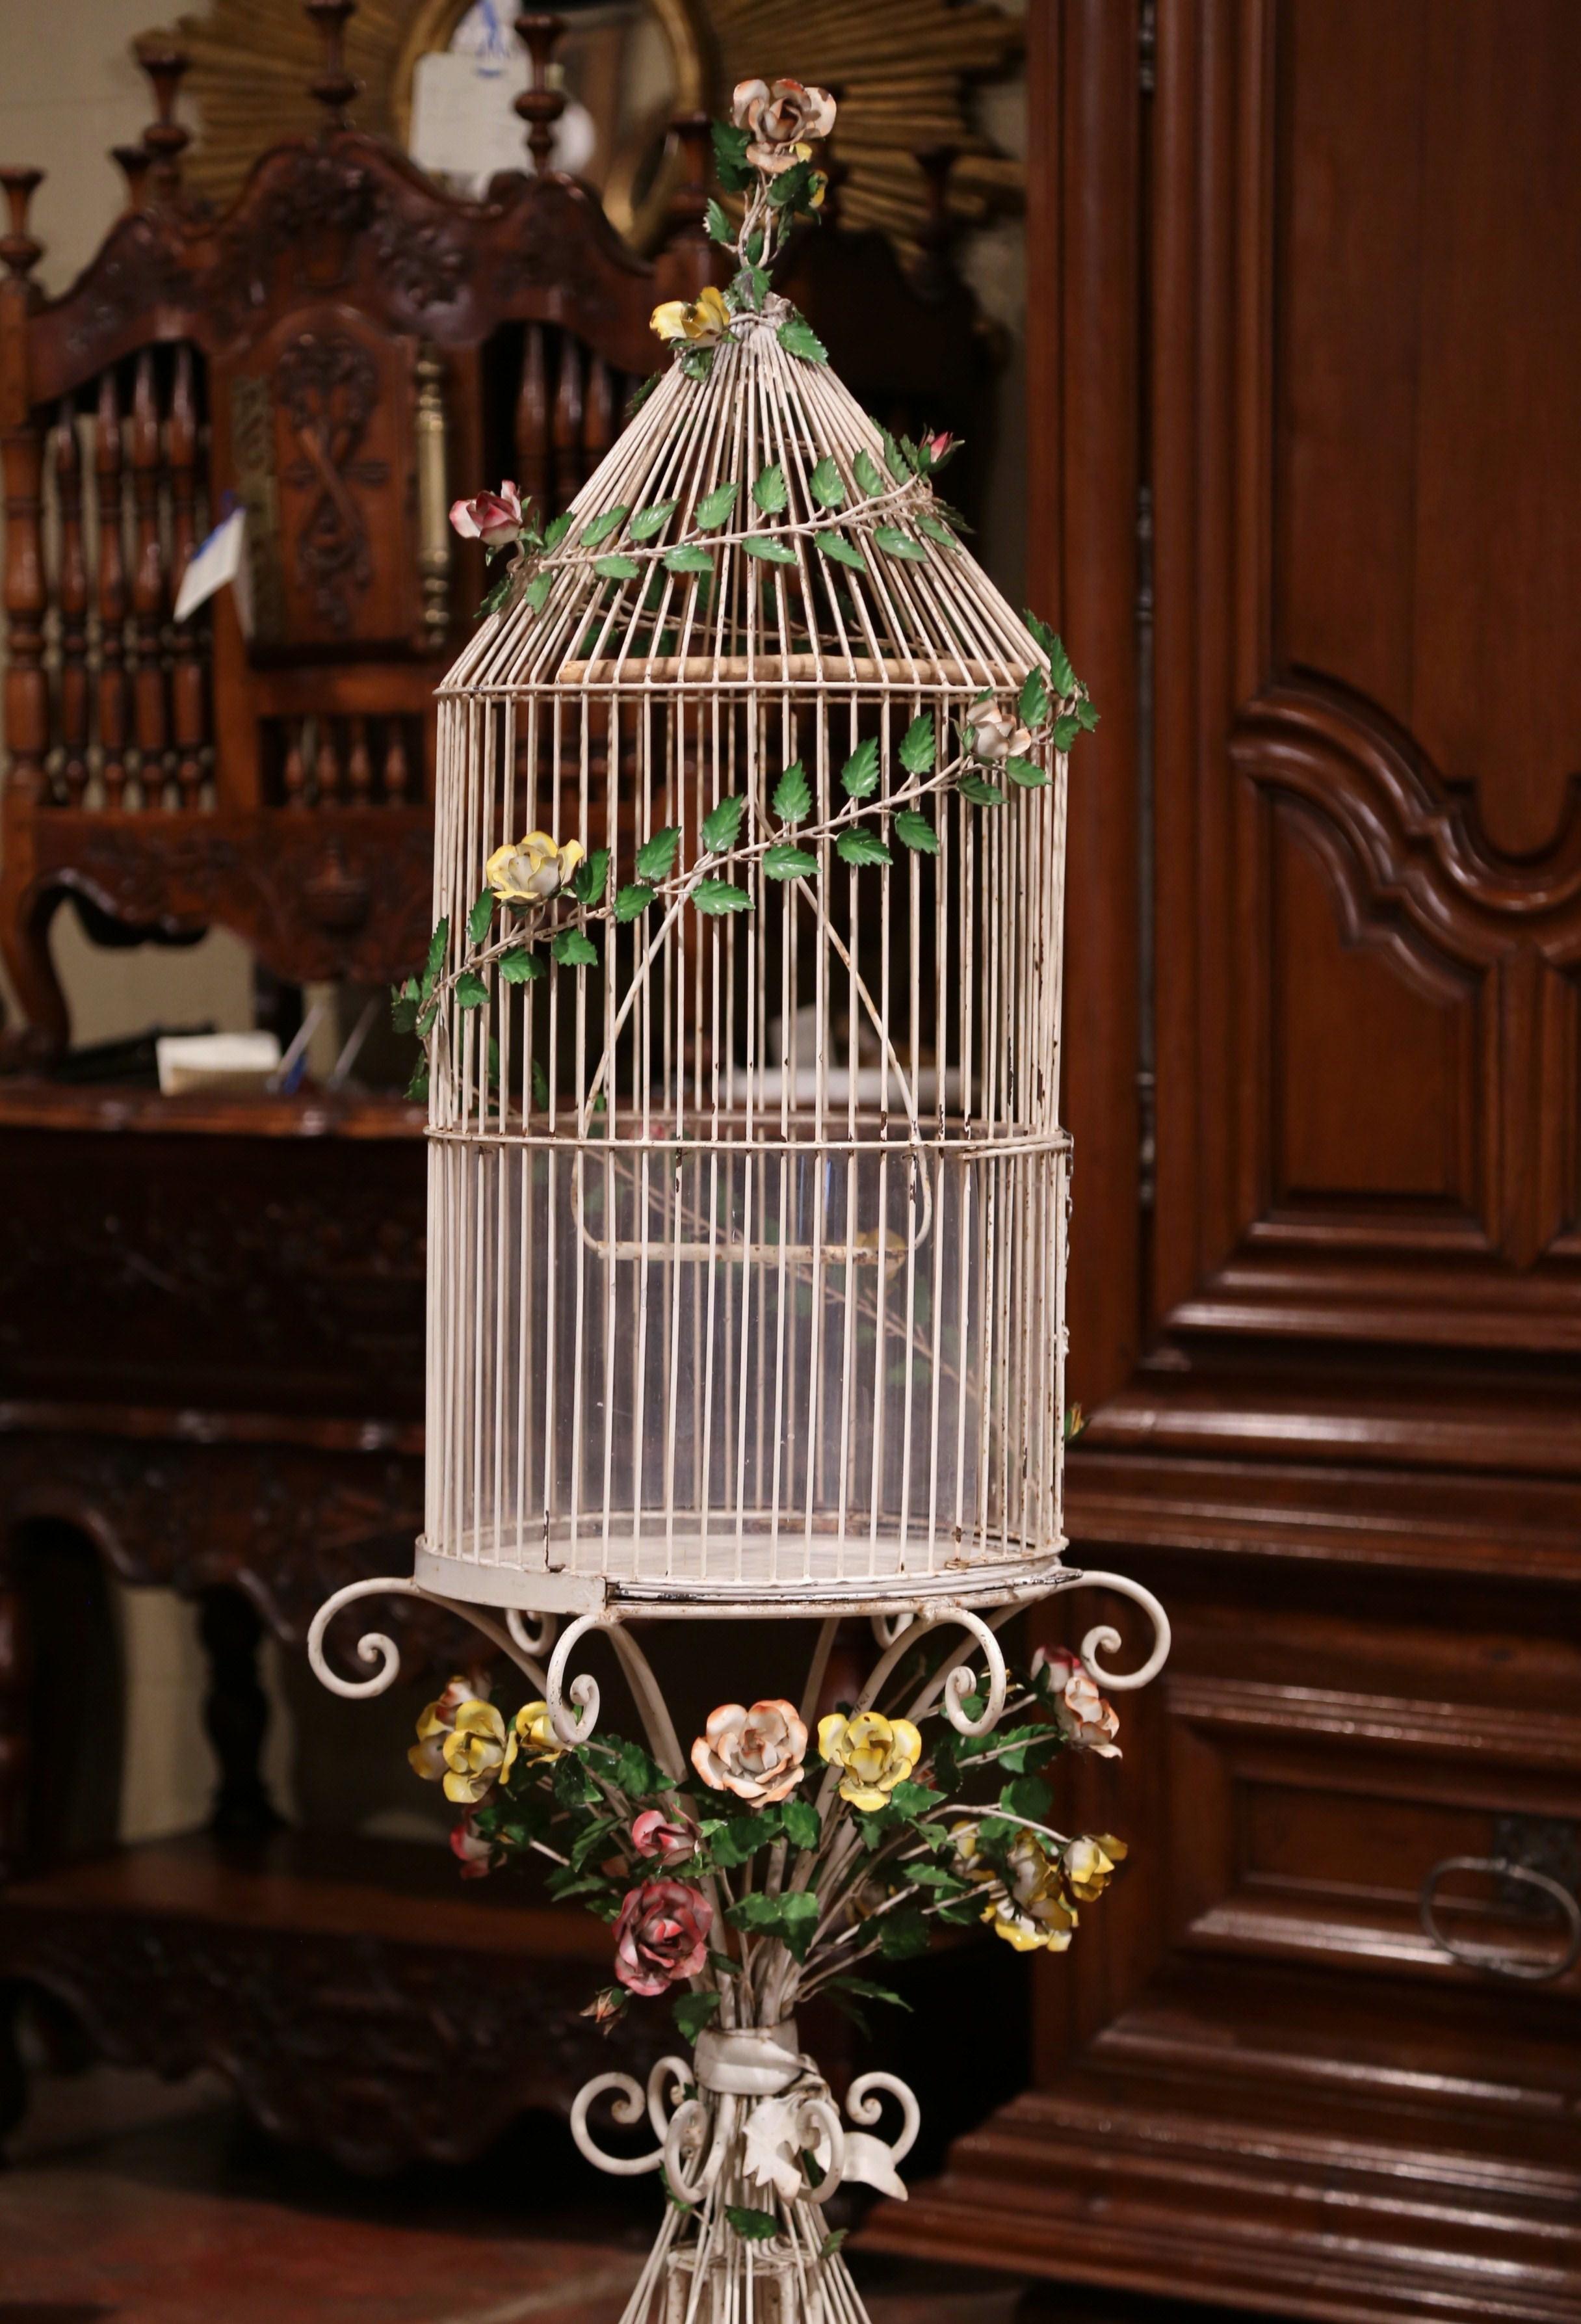 Add color and whimsical charm to your kitchen or breakfast room with this colorful, antique bird cage. Crafted in France, circa 1920 and made of metal, the impressive free standing cage stands on five scrolled legs and is decorated at the shoulder